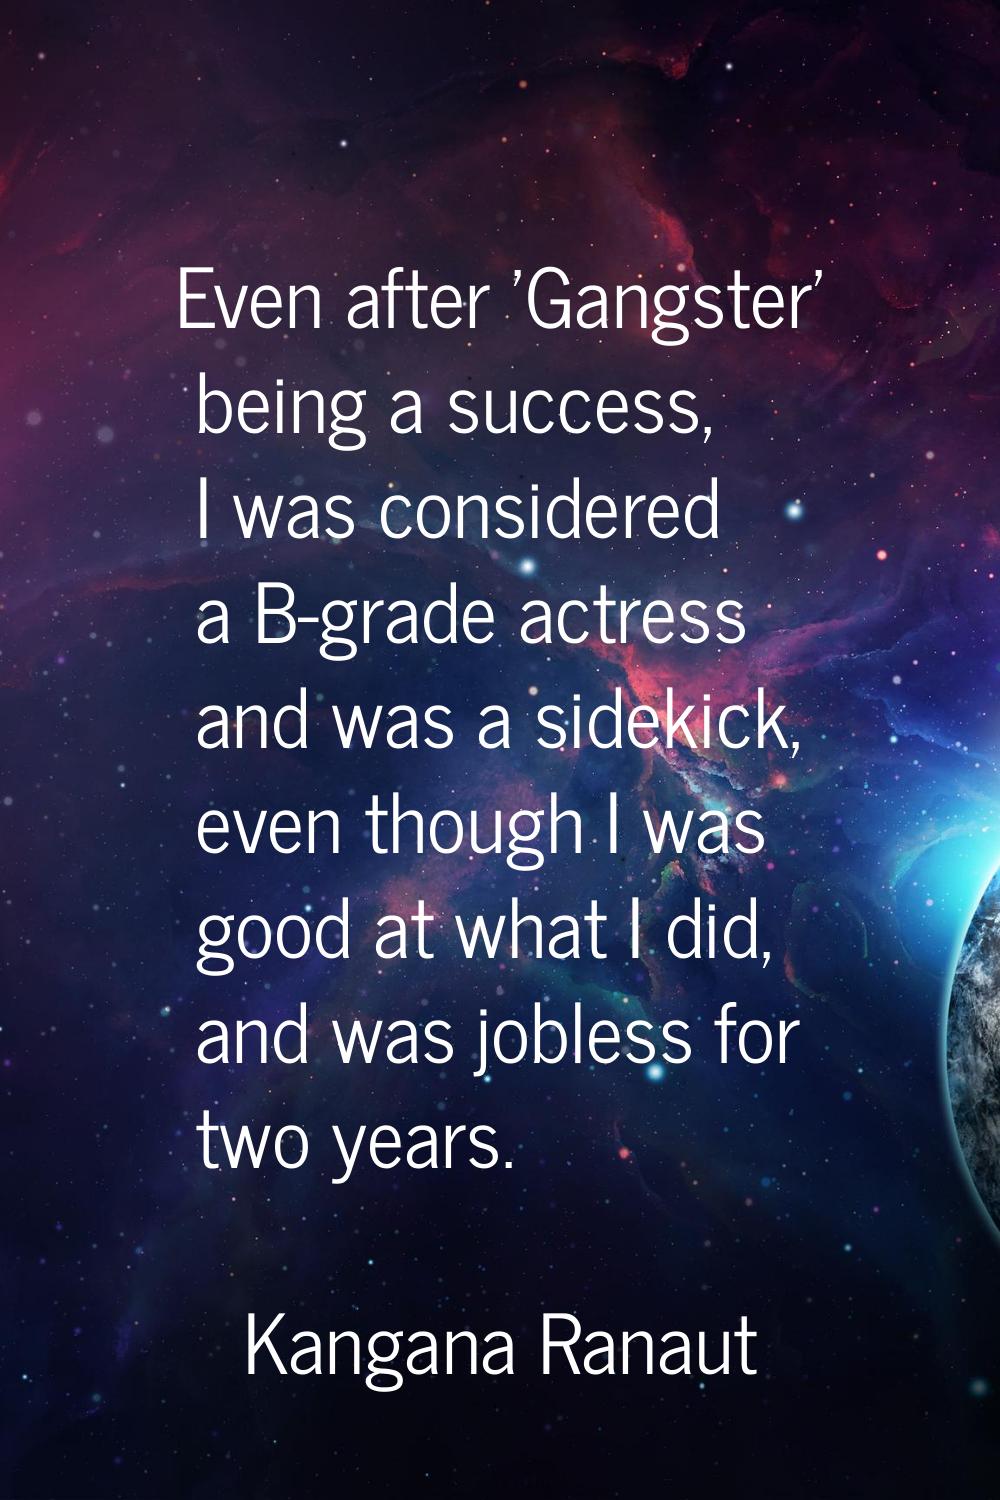 Even after 'Gangster' being a success, I was considered a B-grade actress and was a sidekick, even 